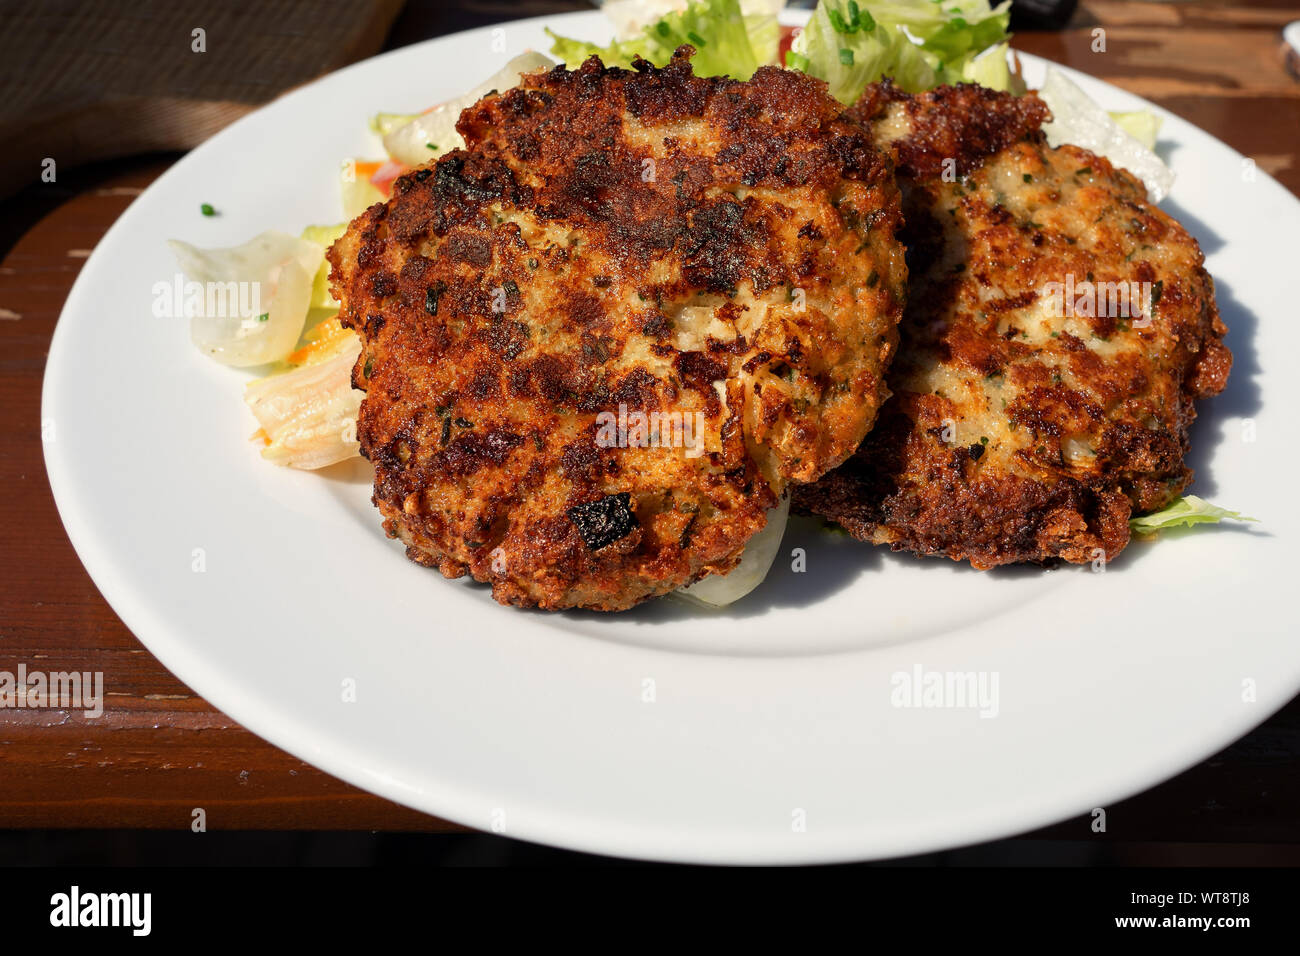 traditional tirolean flat bread dumplings kaspressknödel filled with mountain cheese served with green salad Tirol alm Stock Photo